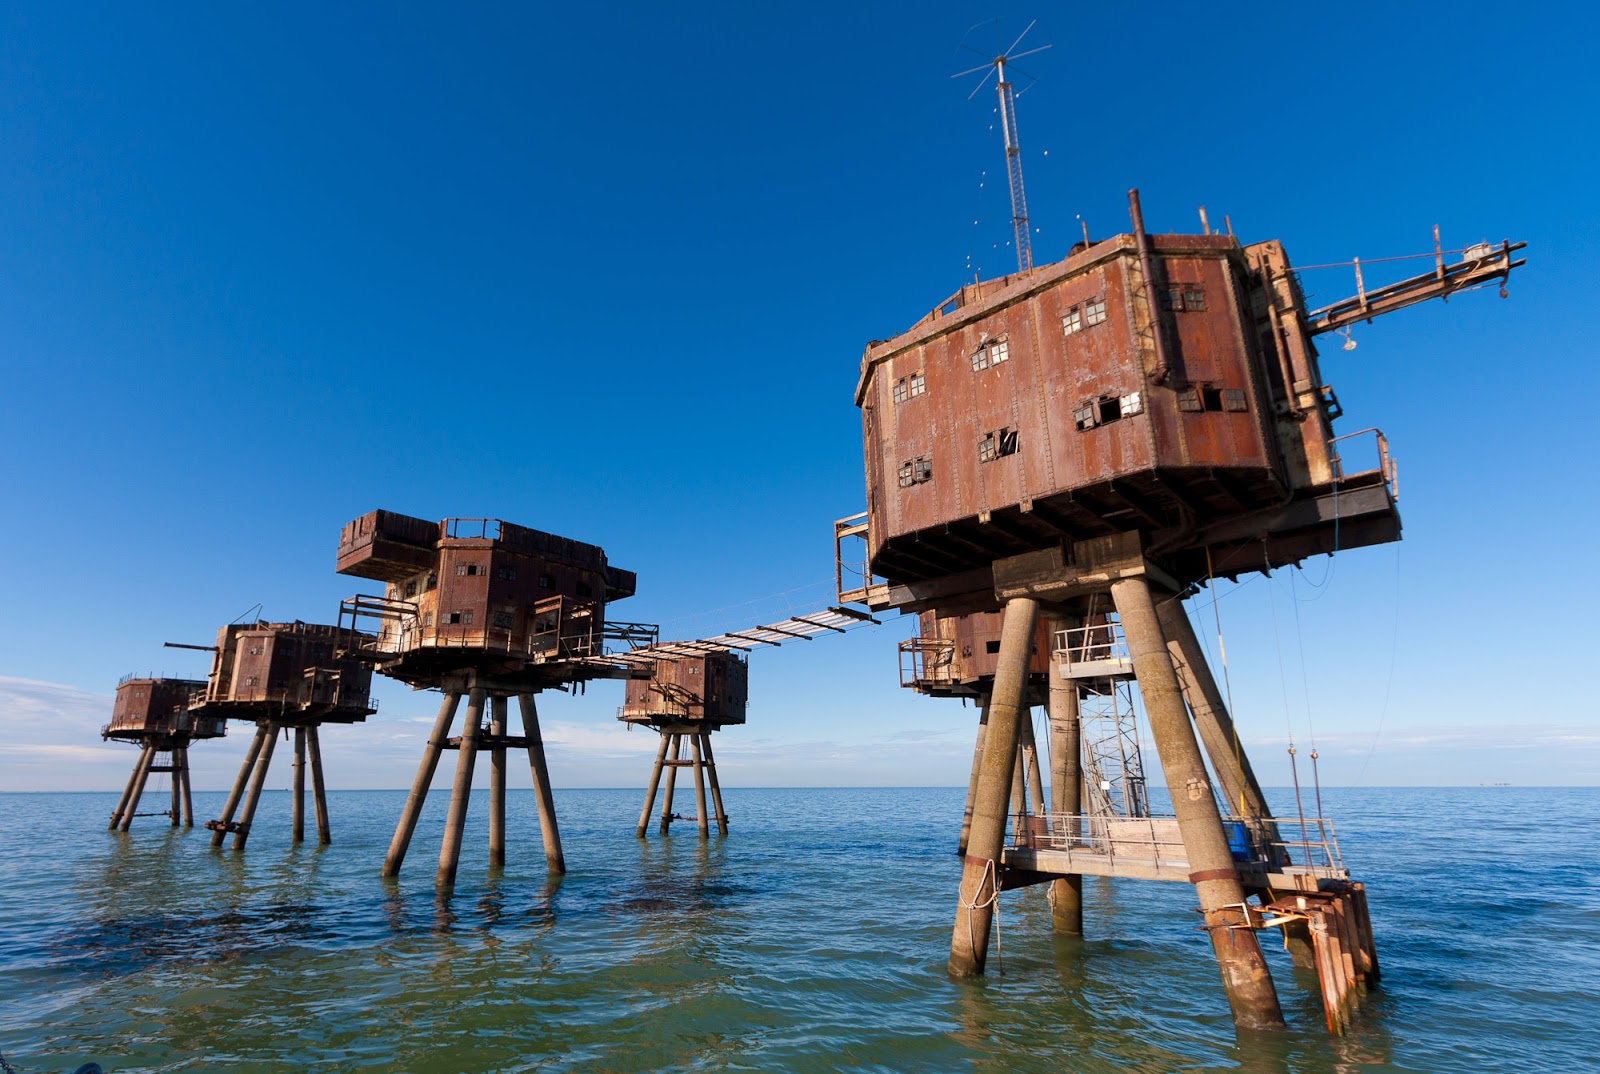 Deserted Places: Maunsell Forts: The abandoned sea forts 